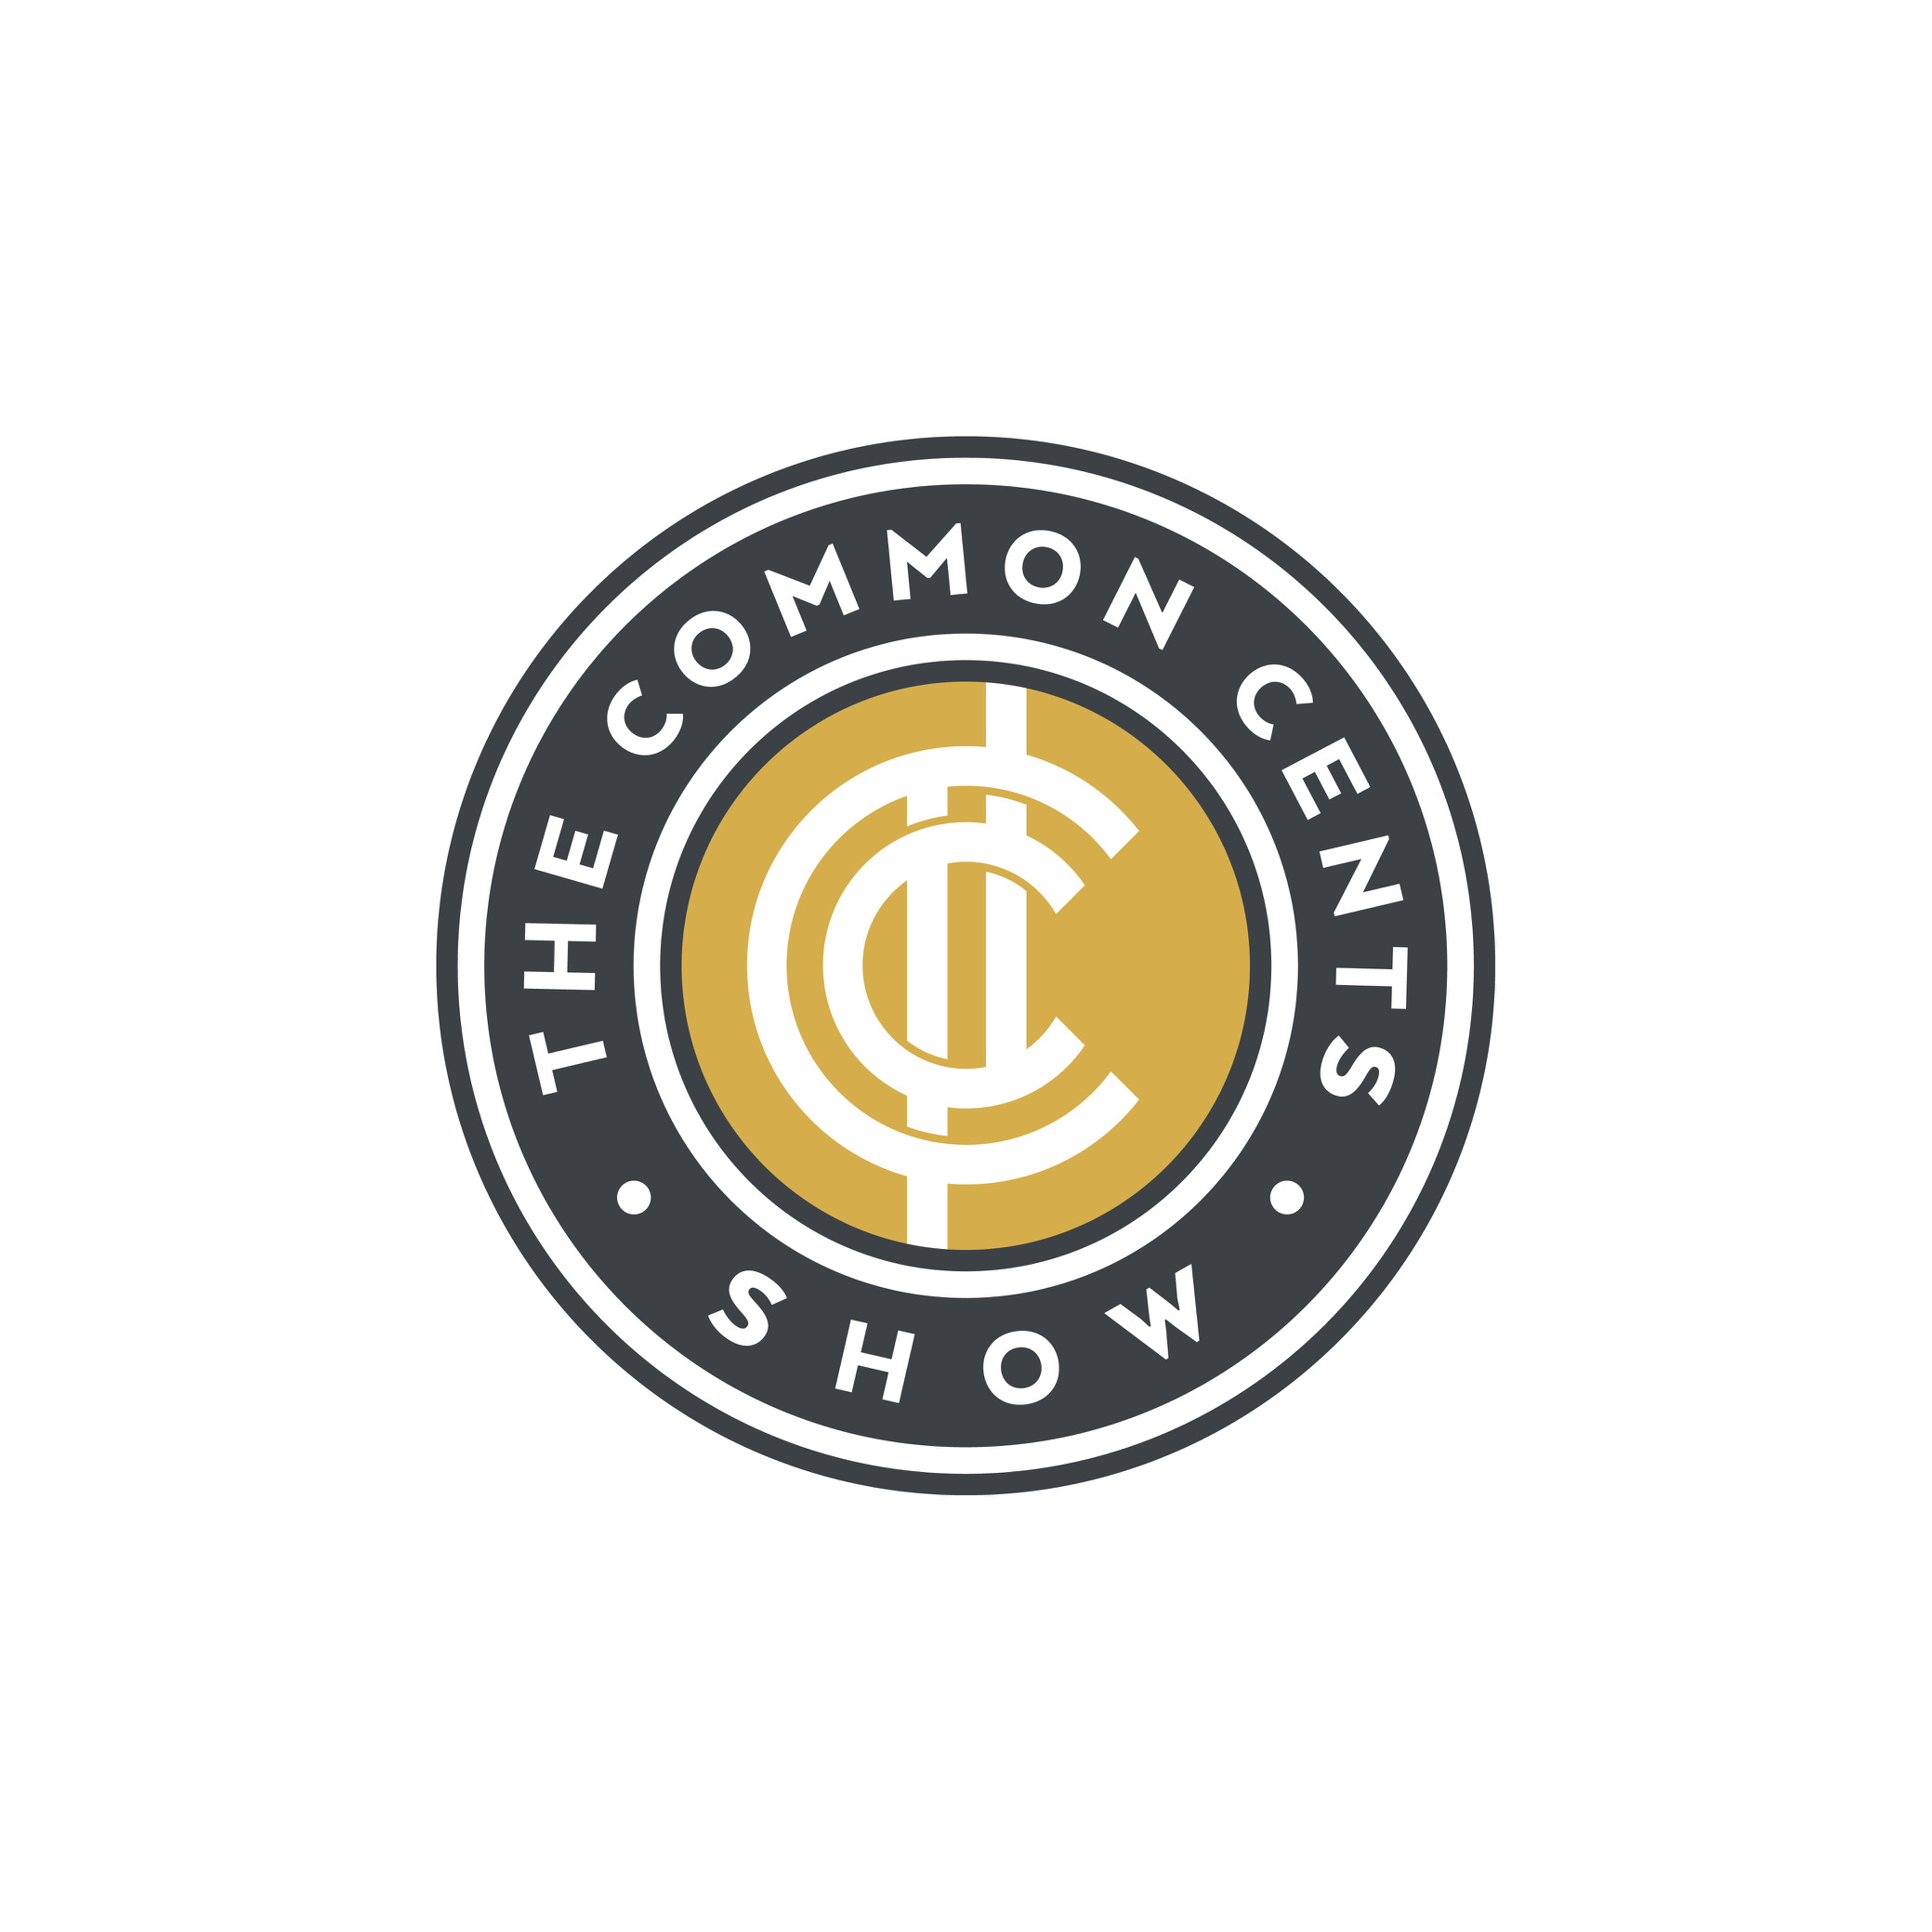 The Common Cents Show